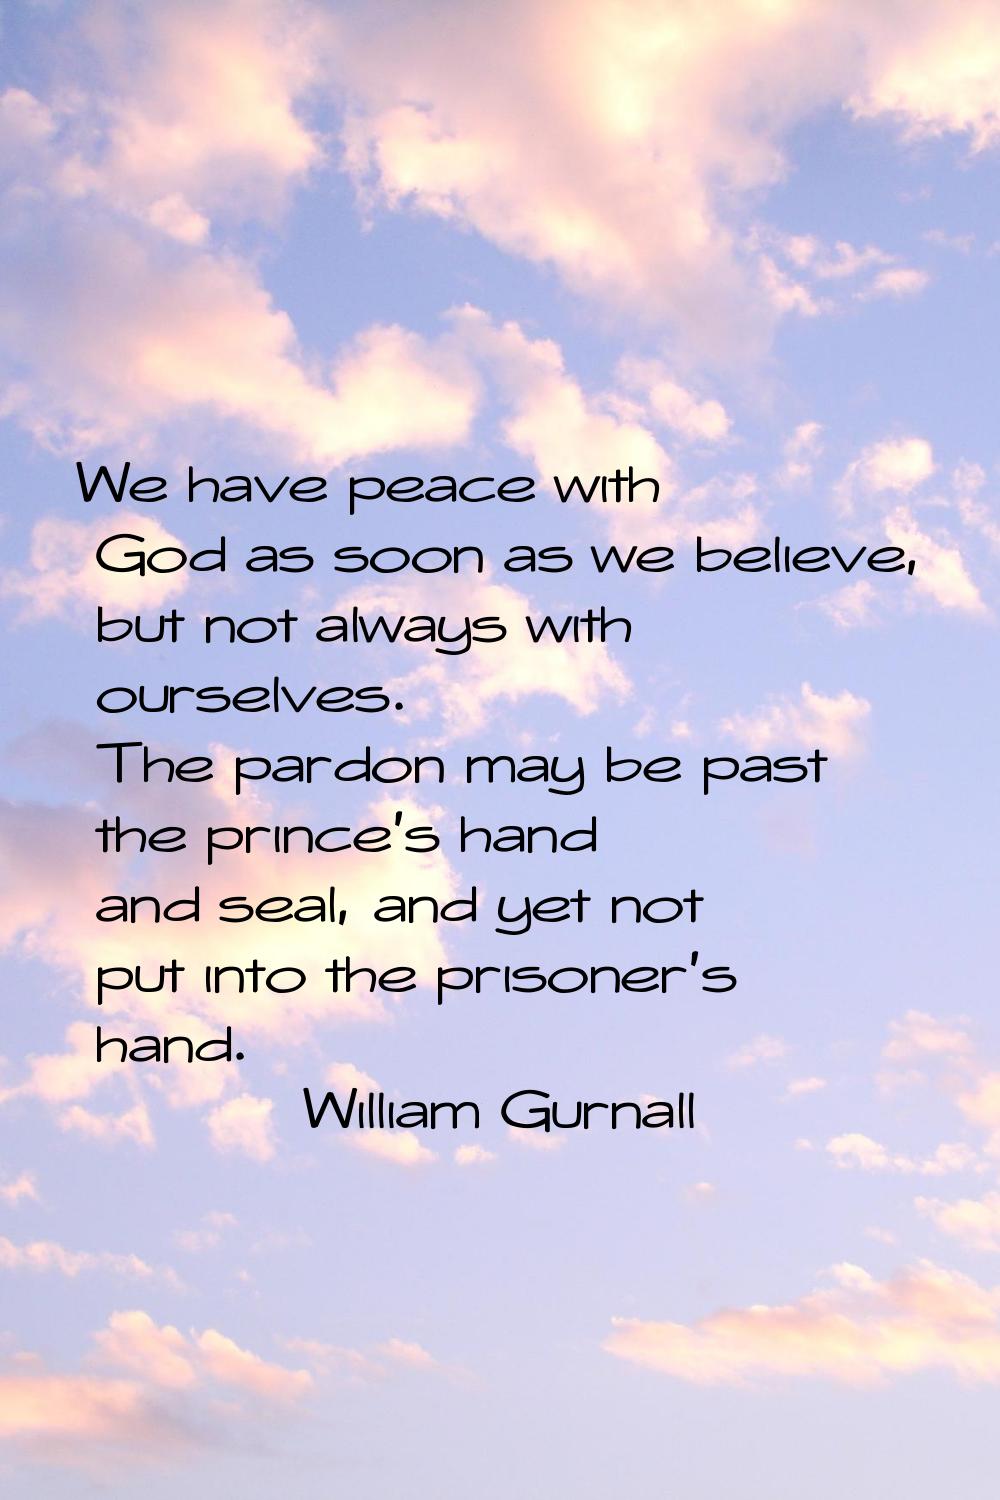 We have peace with God as soon as we believe, but not always with ourselves. The pardon may be past